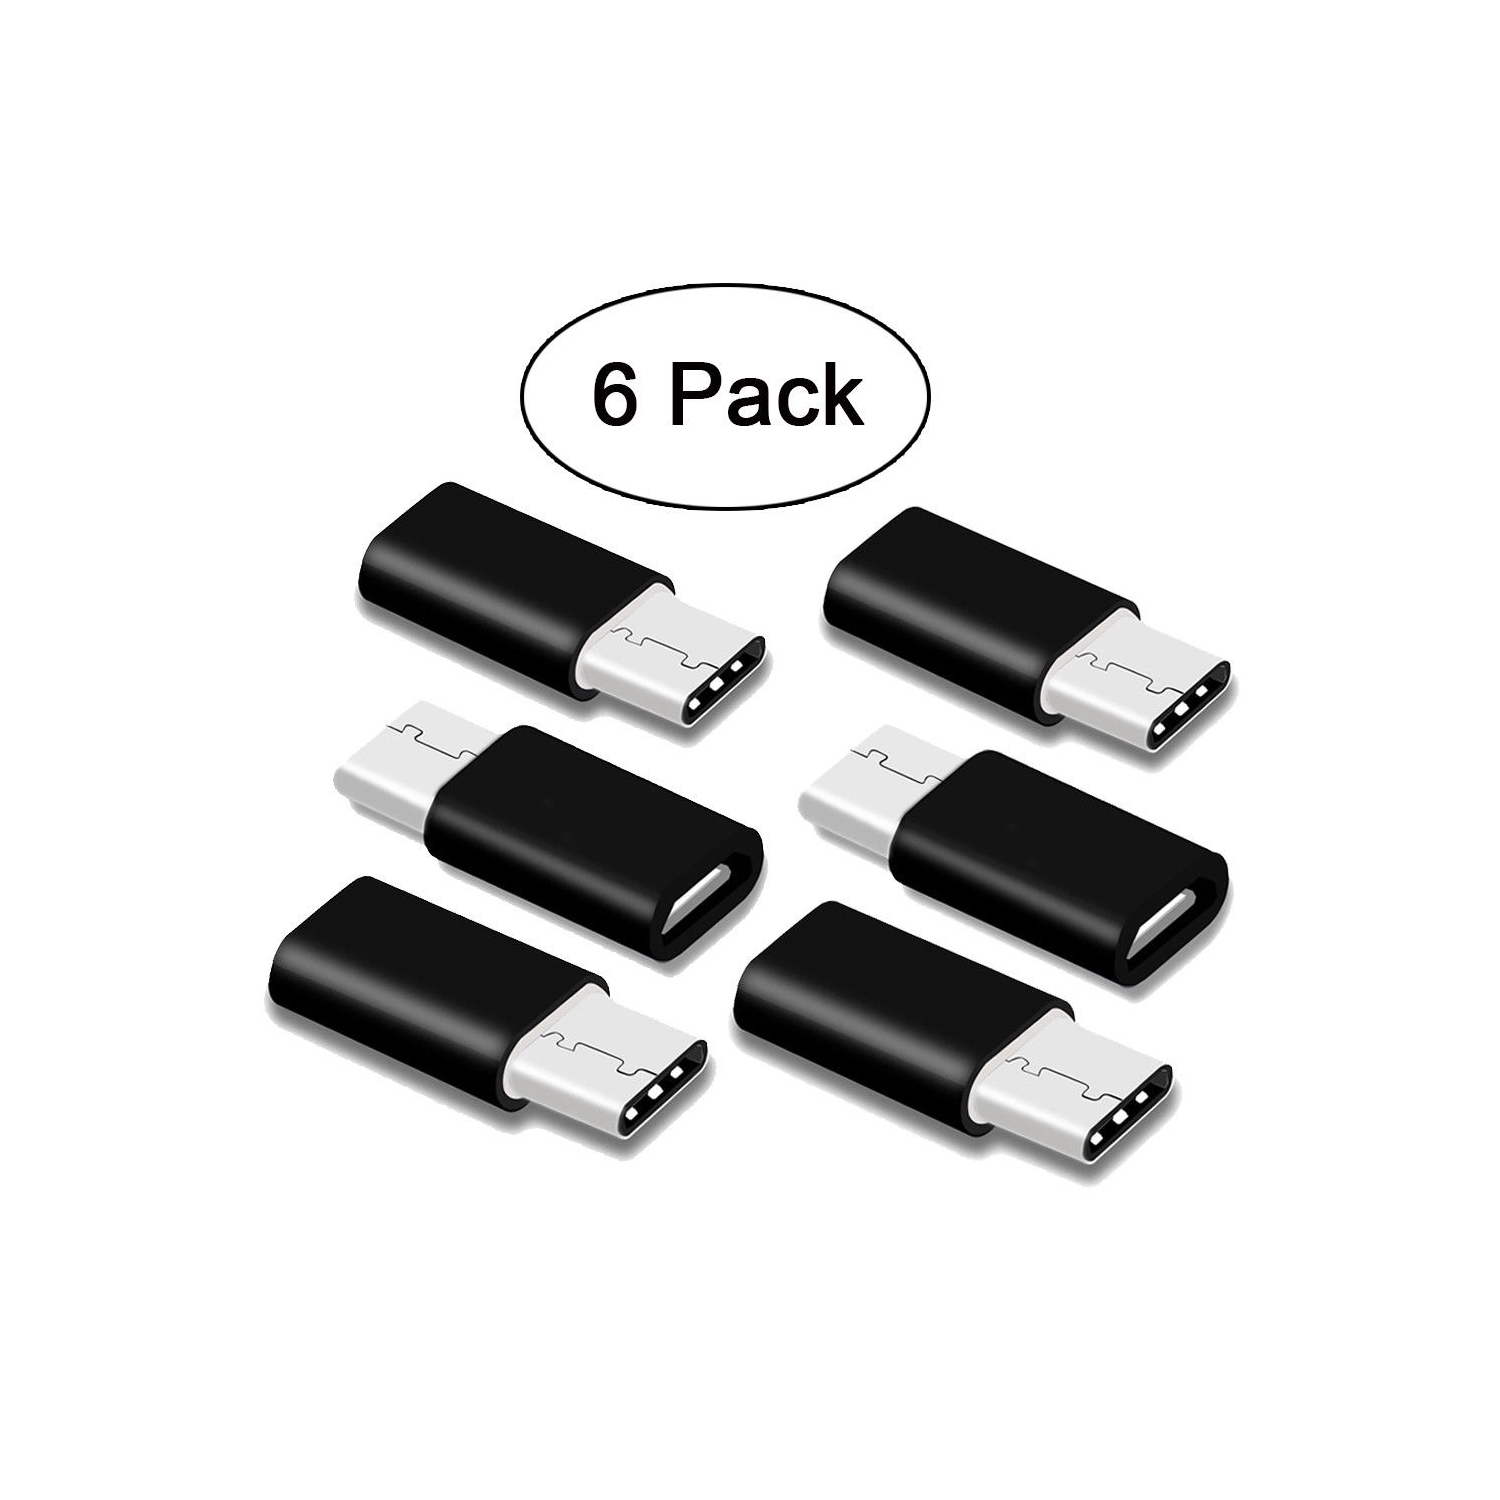 6X Micro USB to USB-C 3.1 Type C Charger Adapter for Samsung LG Huawei (Black)